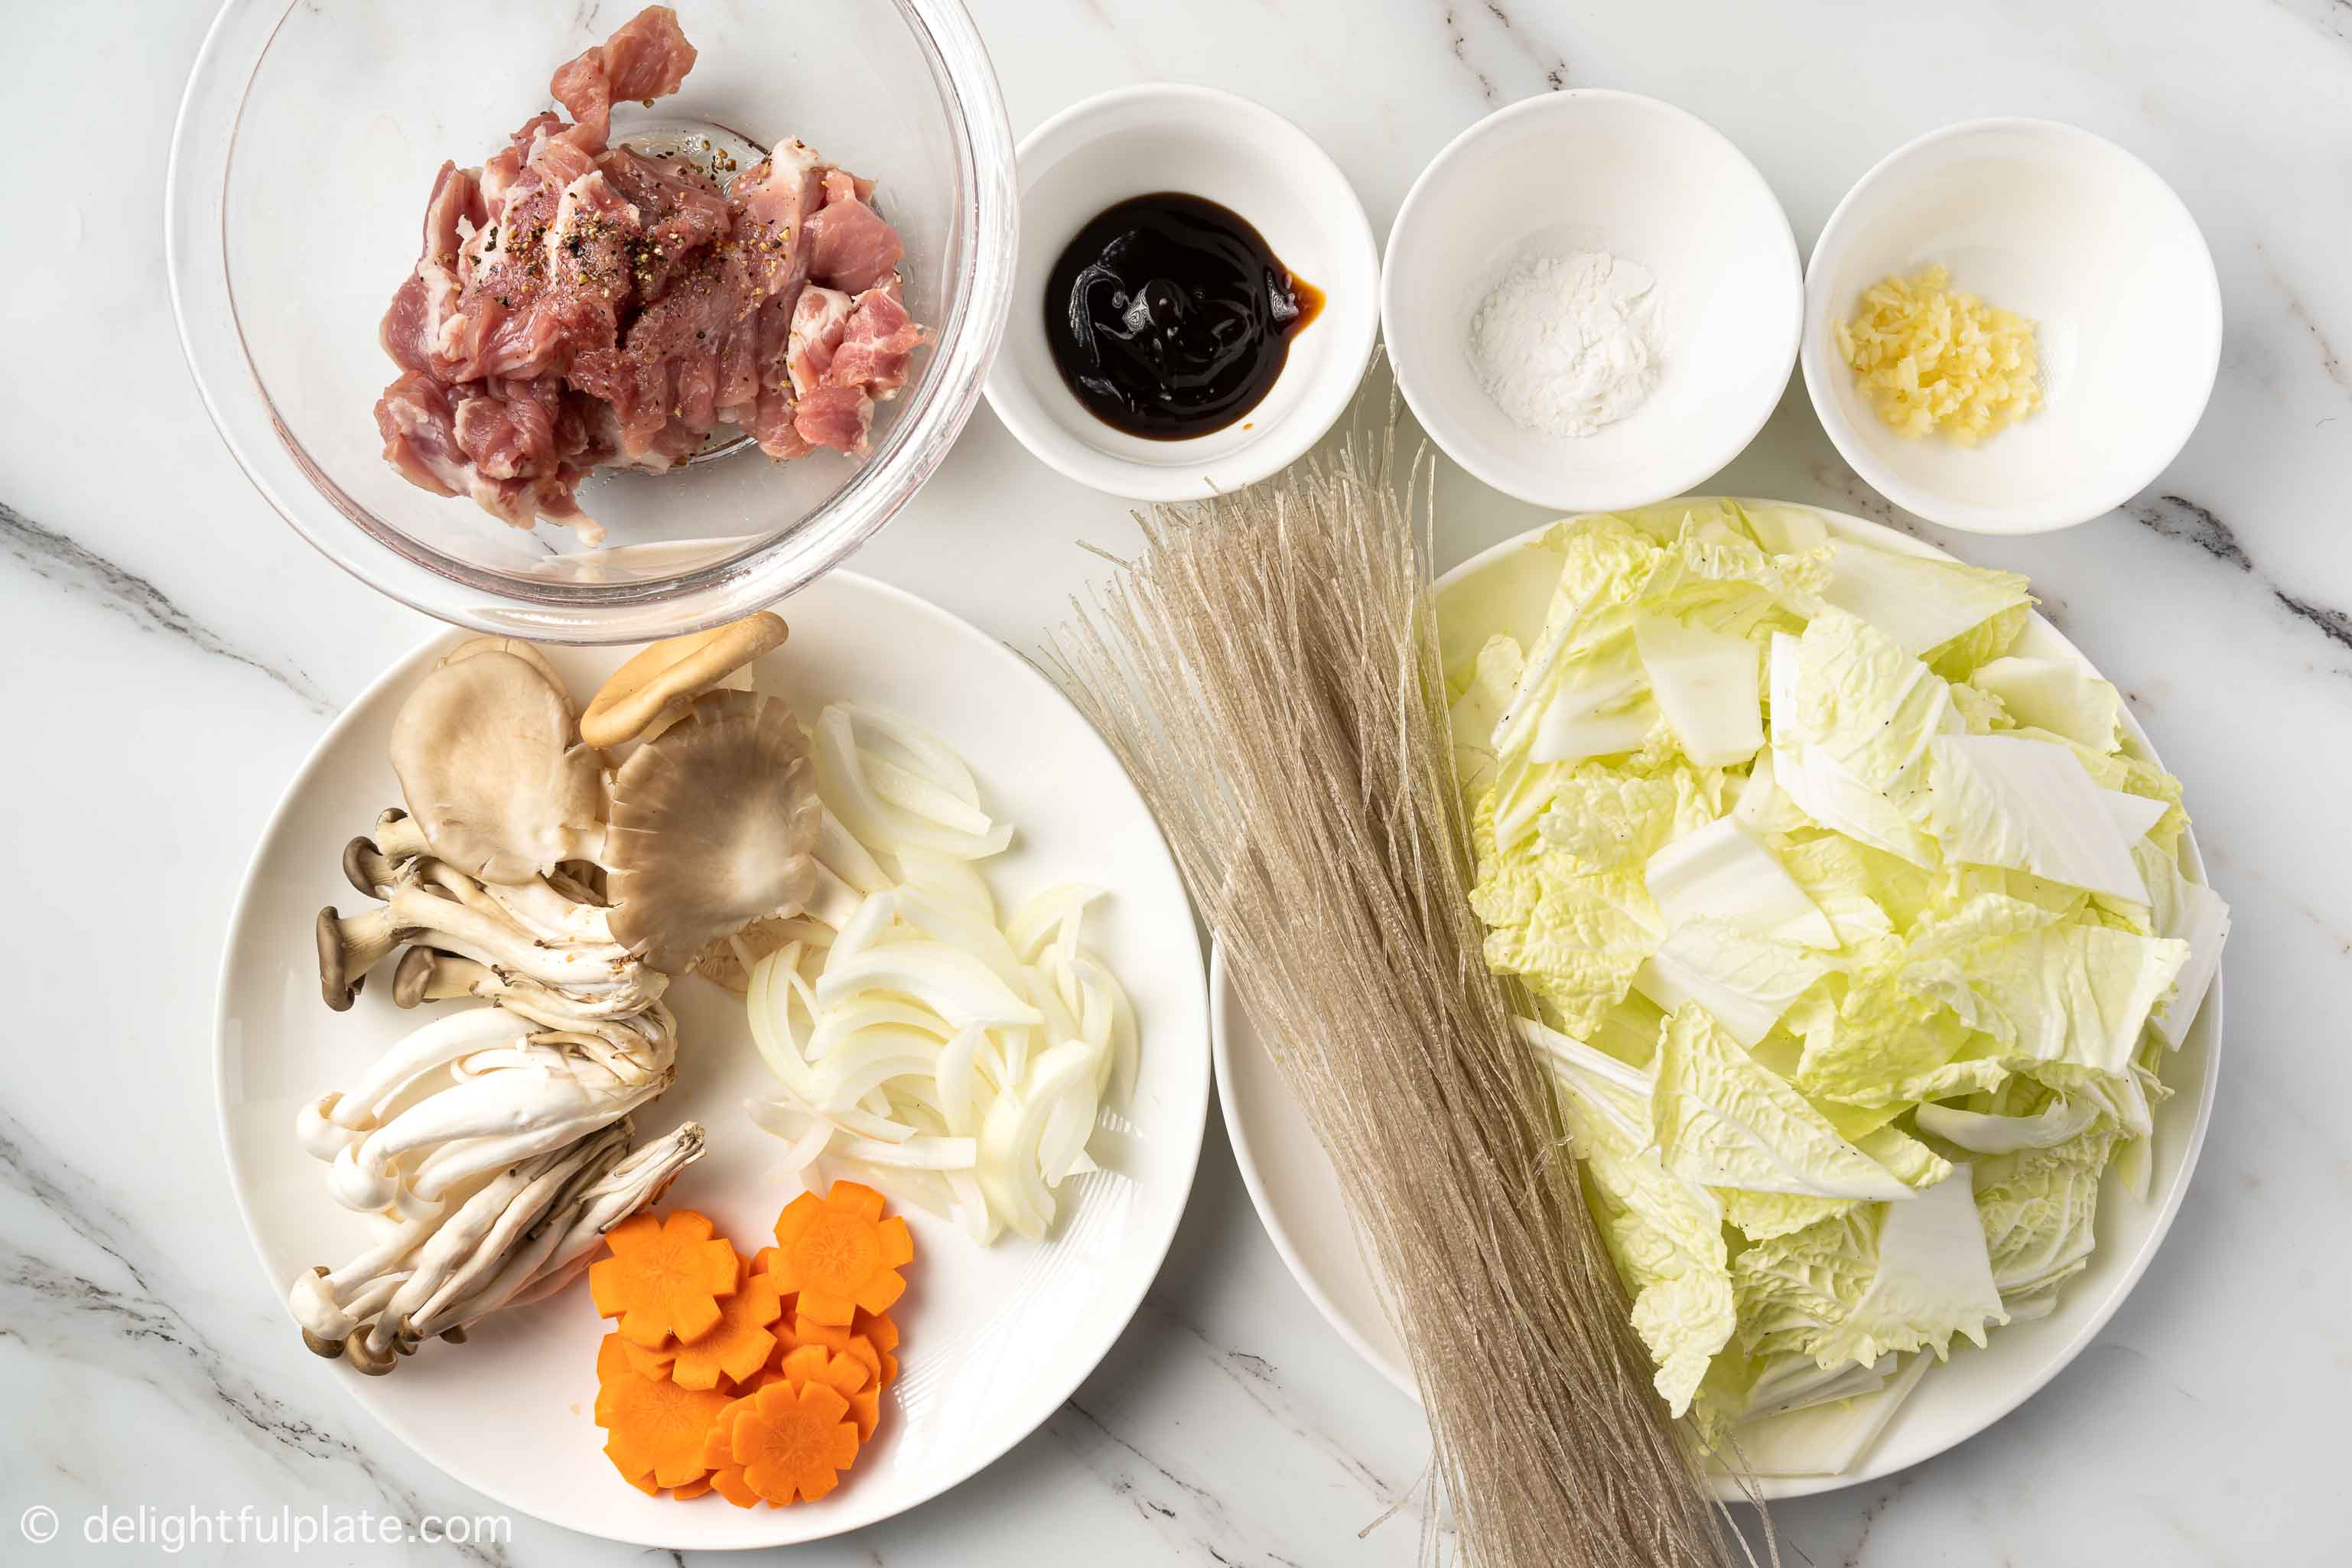 plates with ingredients for this braised glass noodles recipe